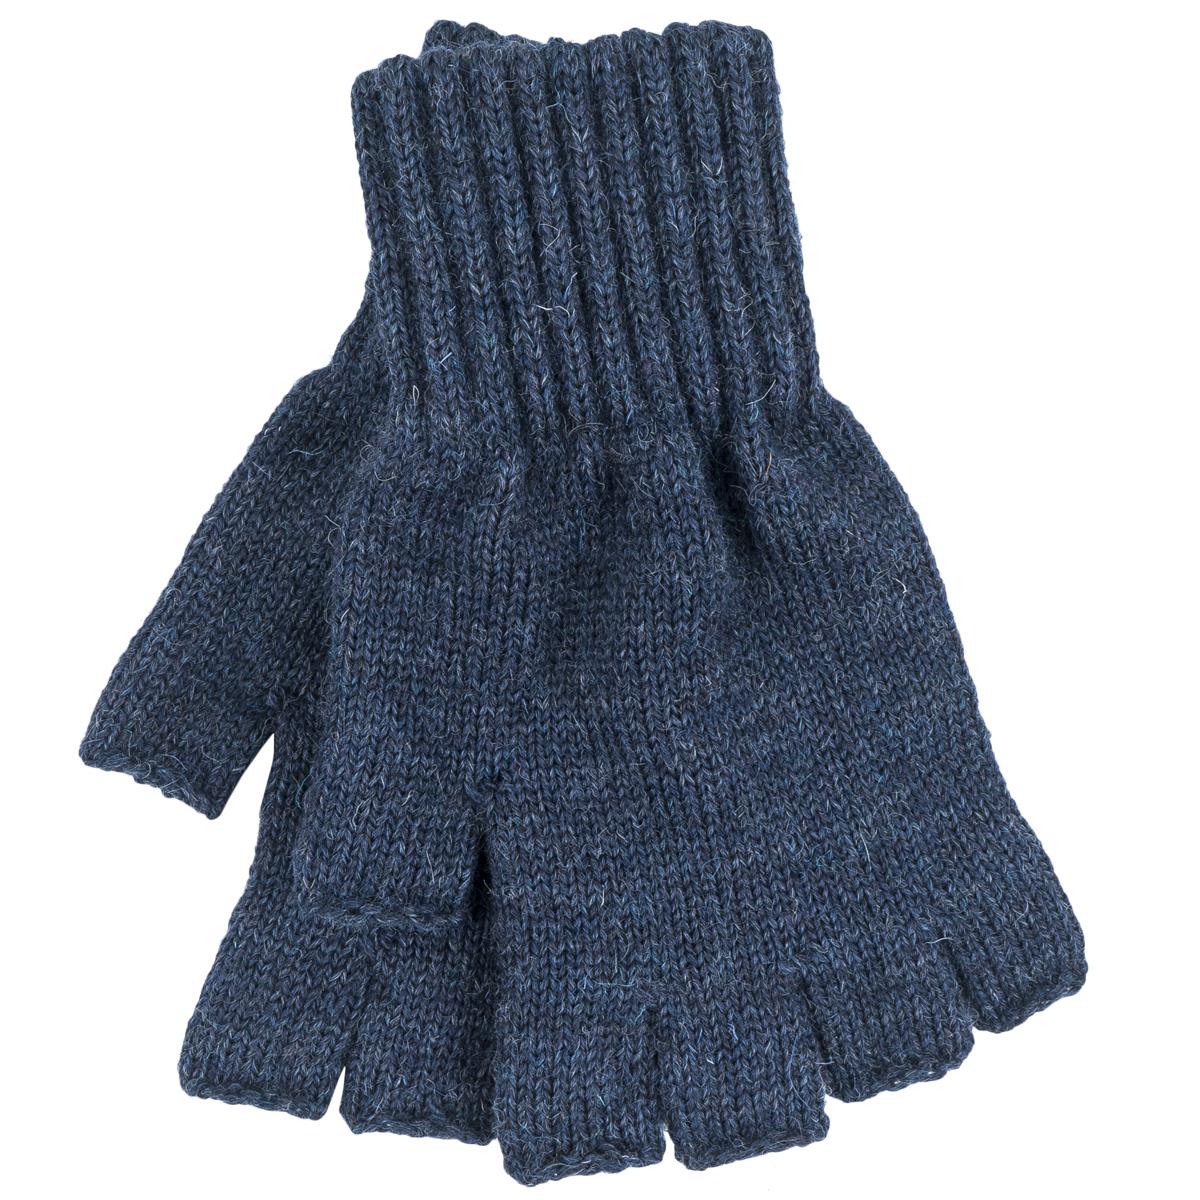 What colors & sizes for barbour fingerless gloves?